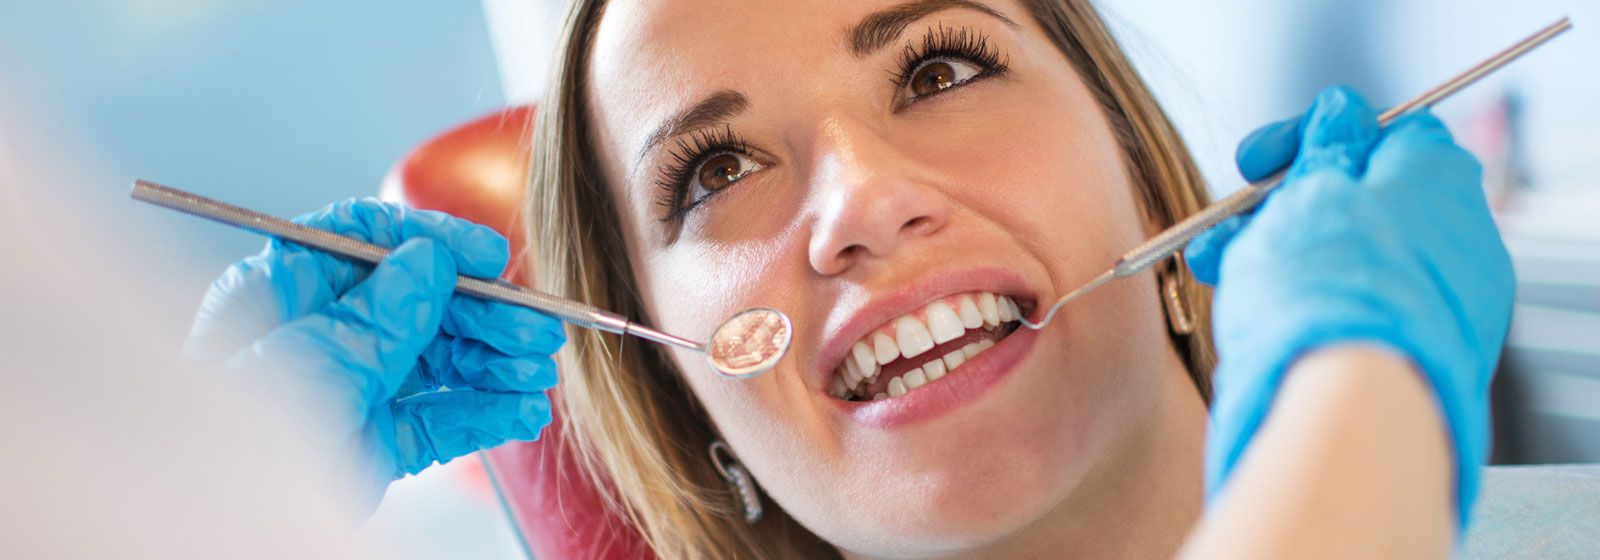 A Woman getting ready for dental checkup